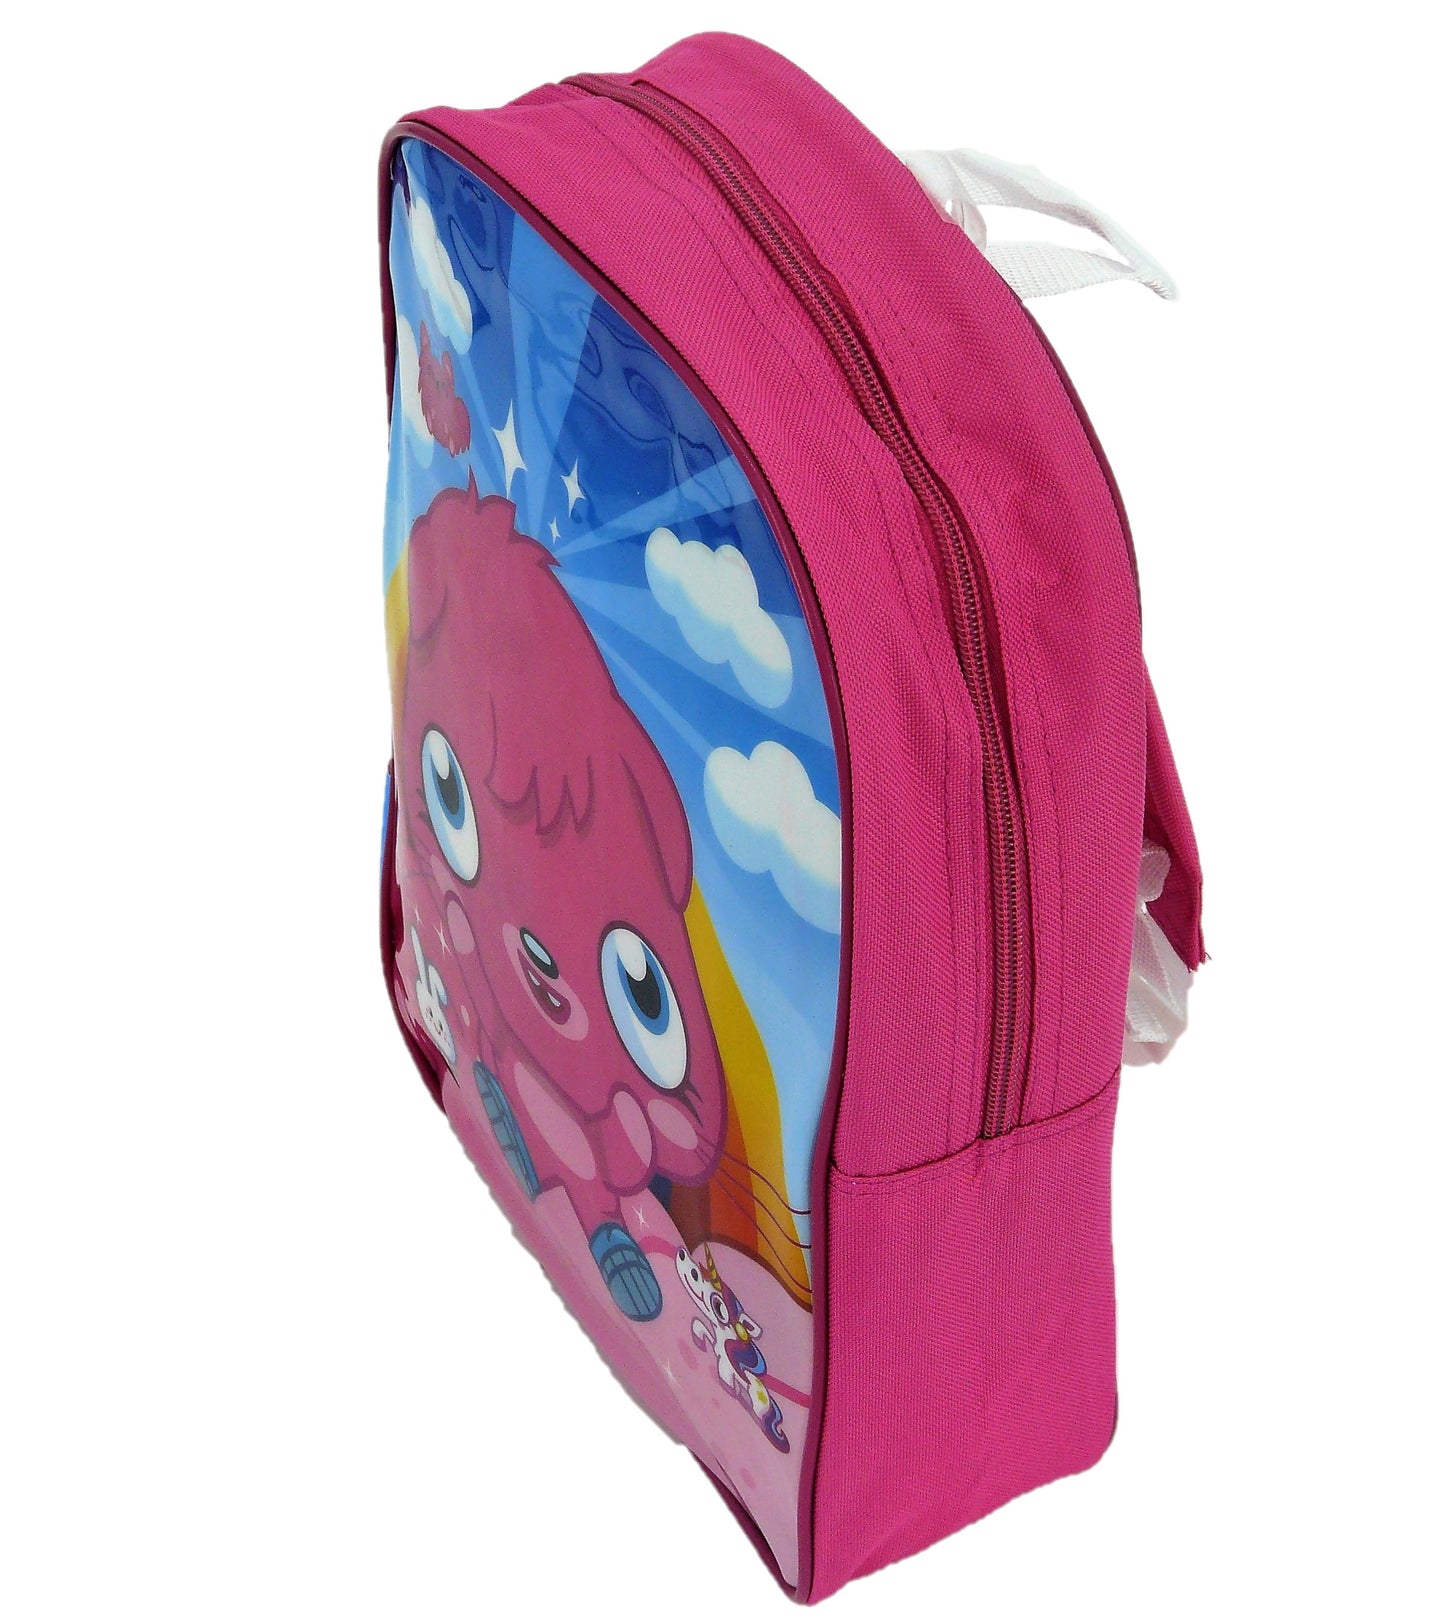 Moshi Monsters Girl's Pretty Pink Backpack Poppet